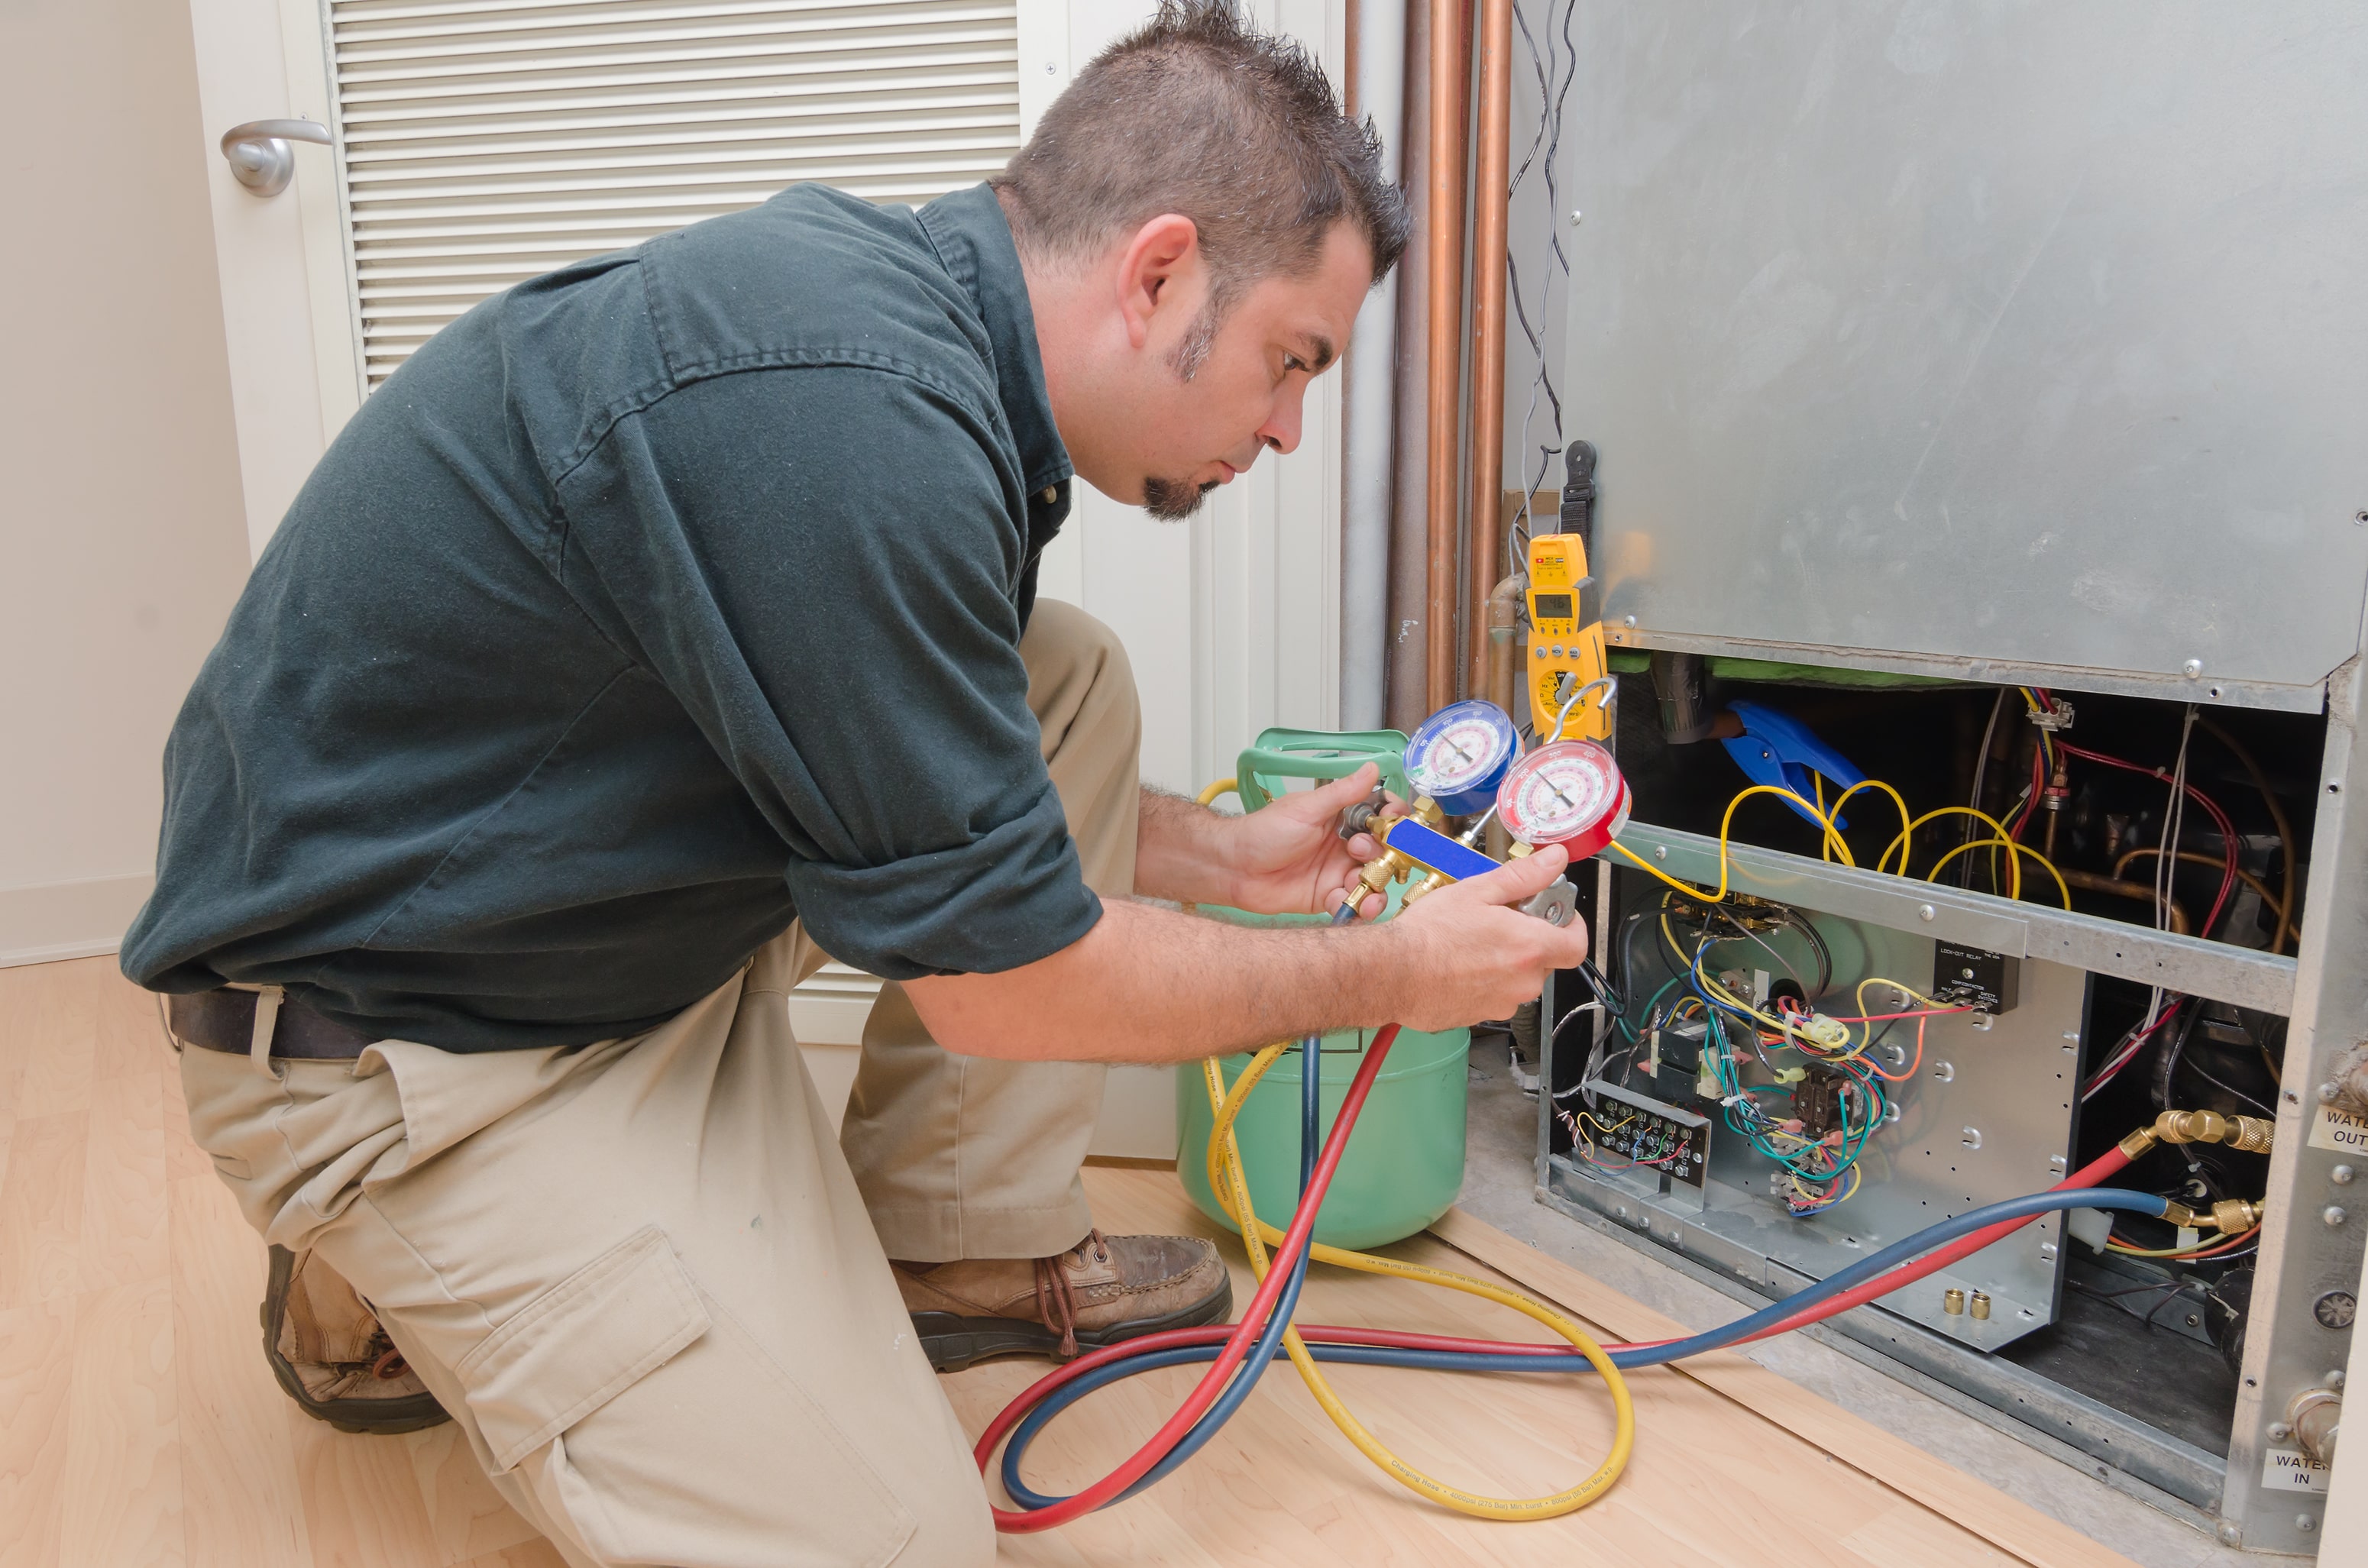  What Should I Do If My Hvac System Breaks Down? Tips and Tricks: Orlando FL thumbnail